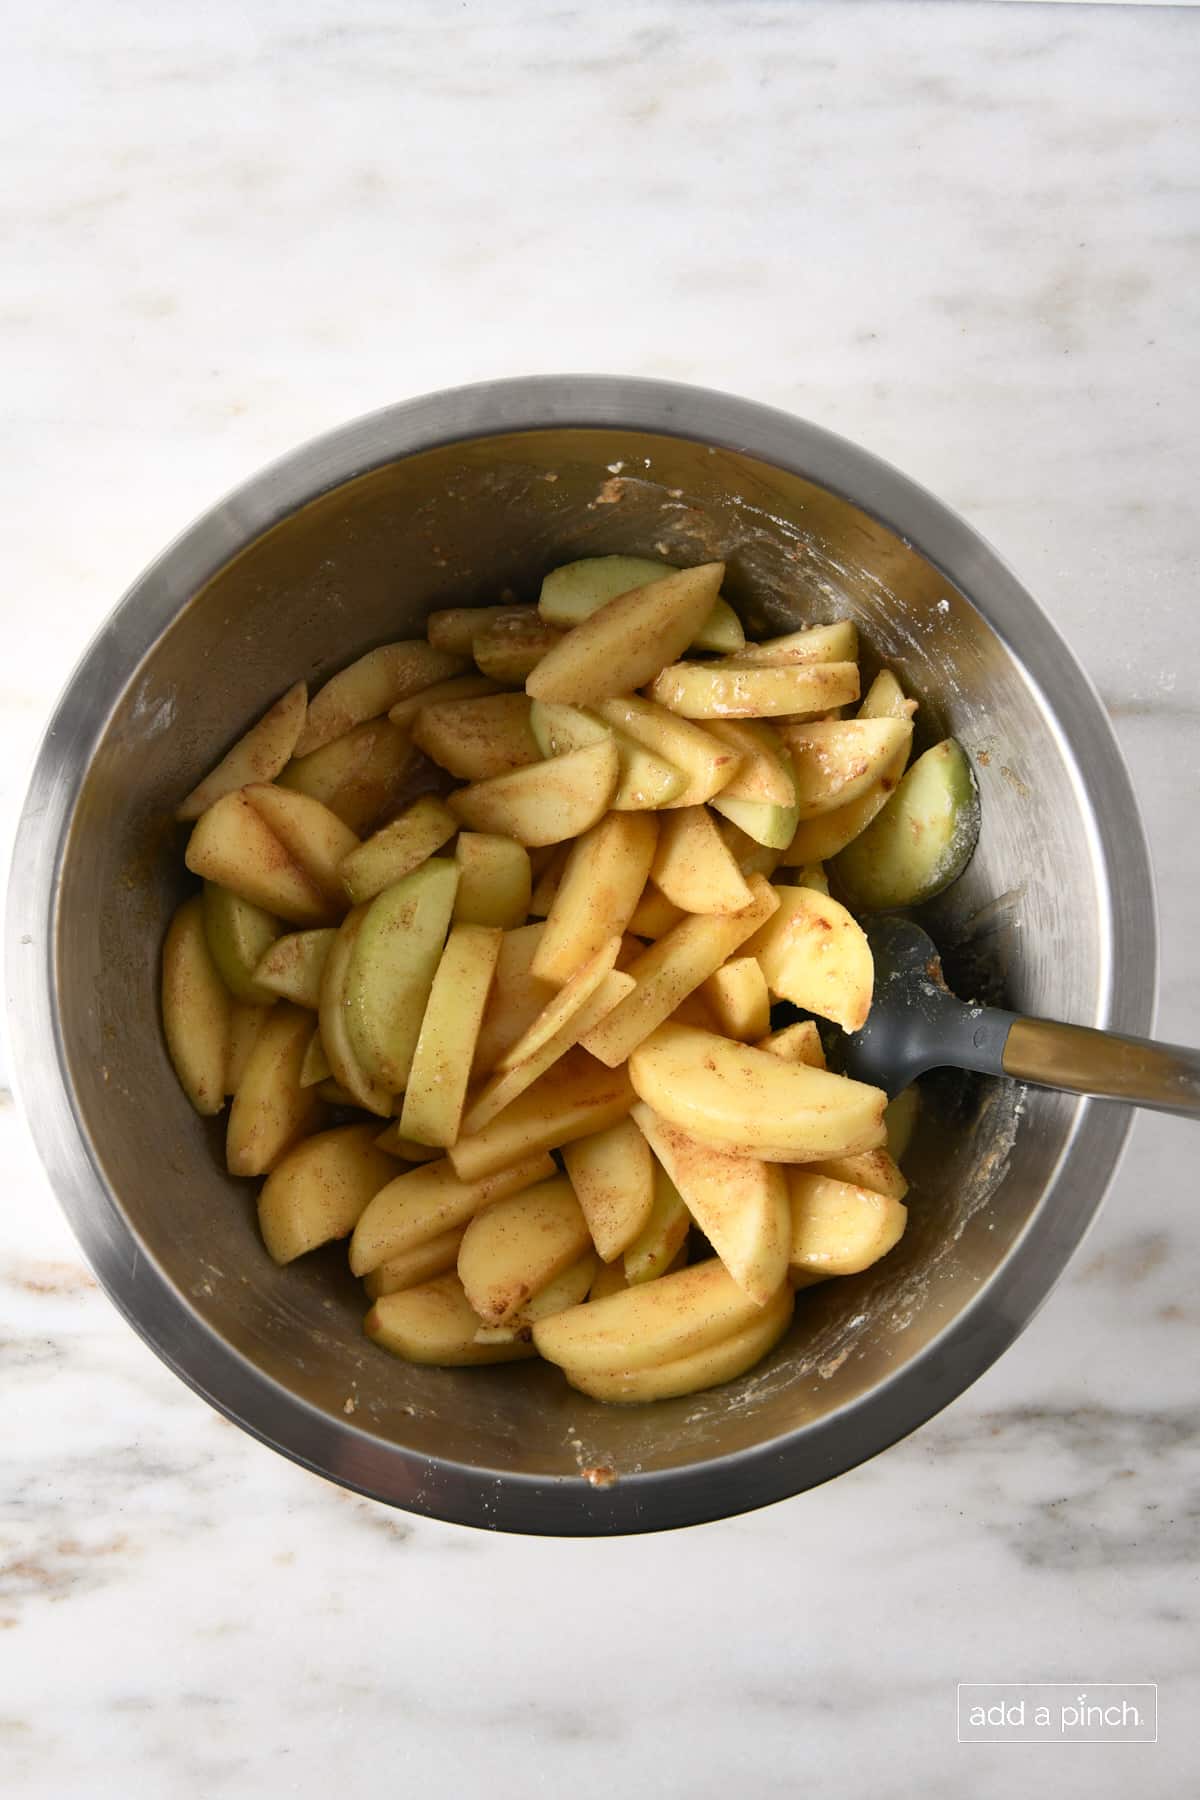 Stainless mixing bowl on marble counter holds apple slices coated in cinnamon, brown sugar and other apple filling ingredients.